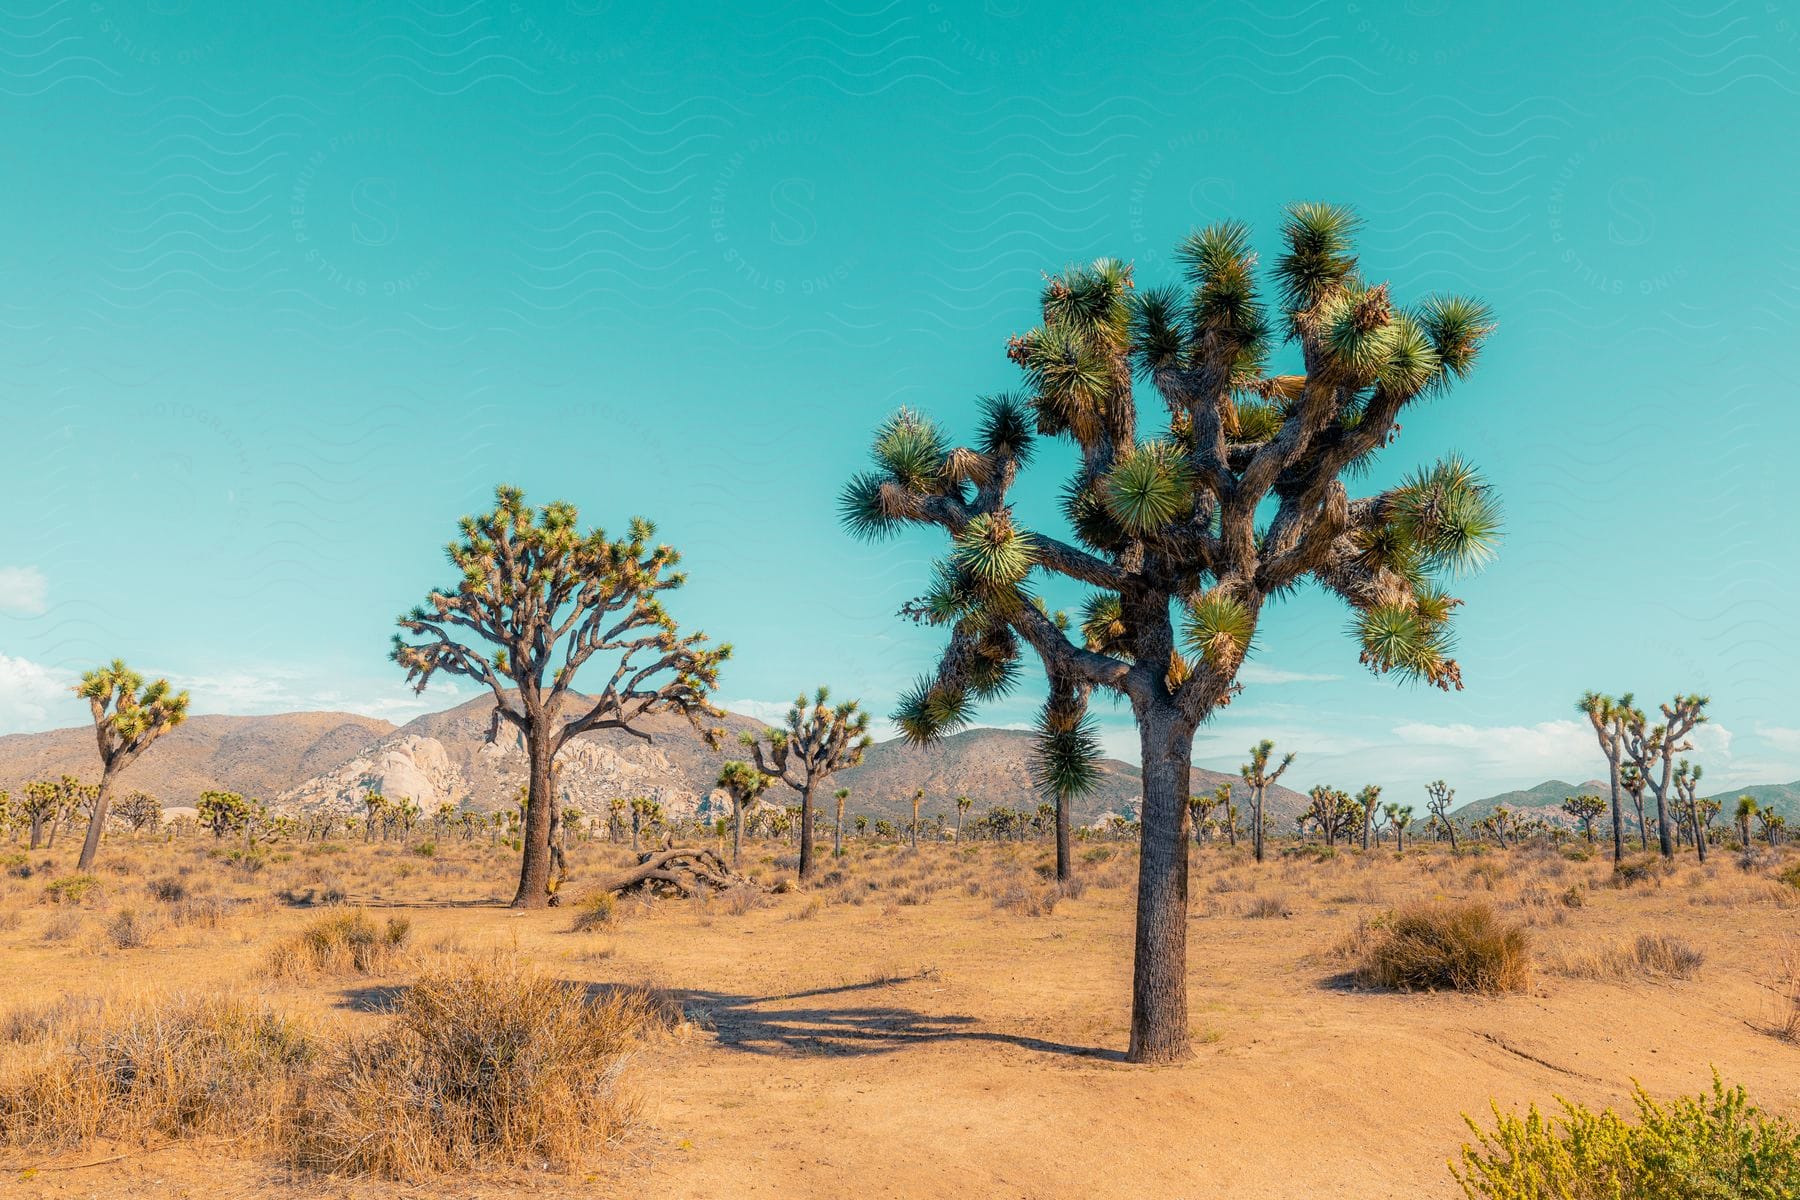 Sunlit trees in the desert at joshua tree national park with distant mountains